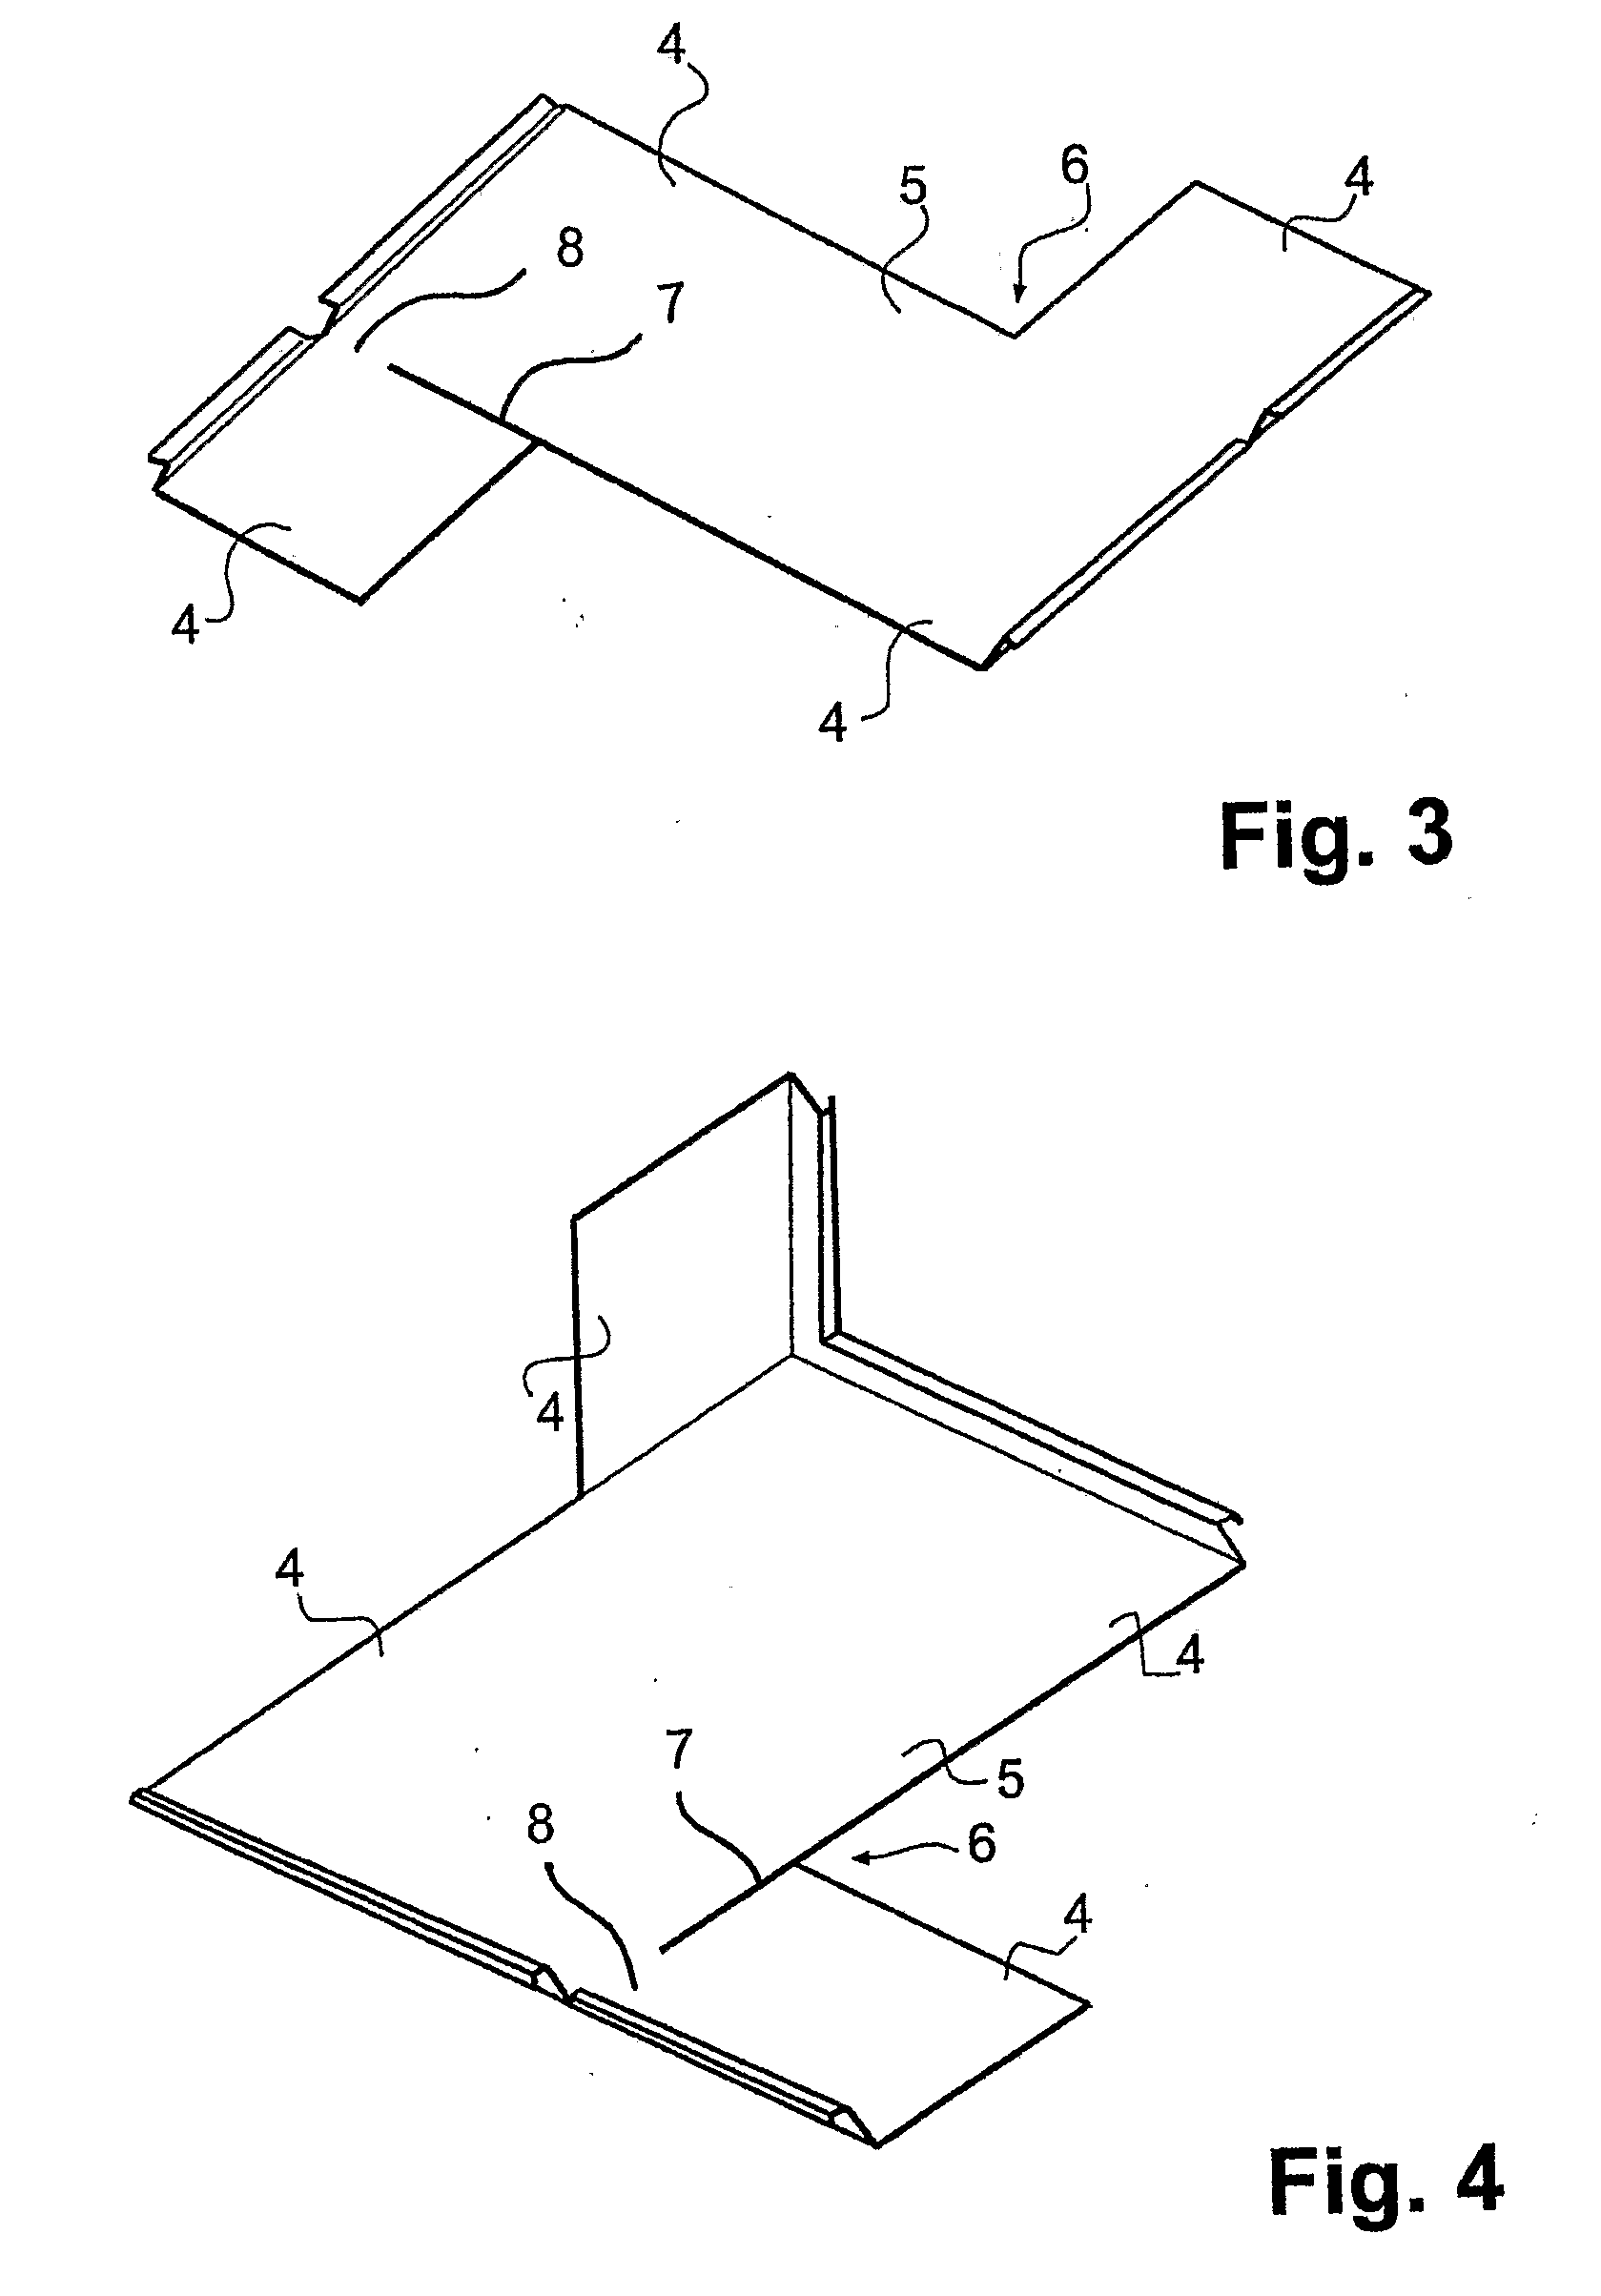 Method for manufacturing enclosures of a sheet material and an enclosure of a sheet material